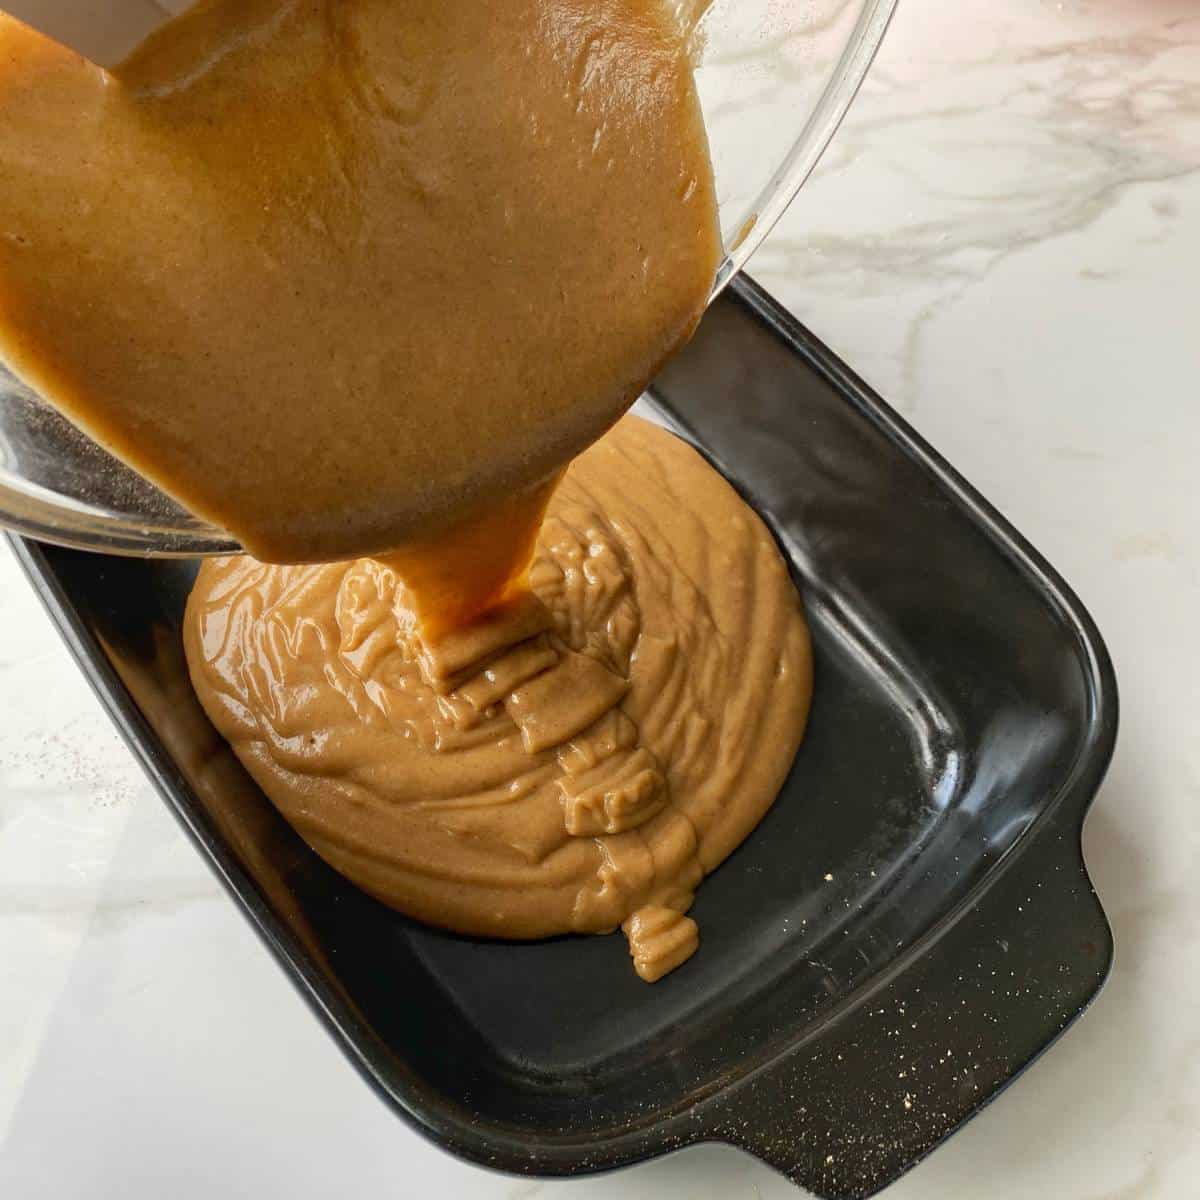 Gingerbread pudding batter being poured from a glass mixing bowl into an oven proof dish